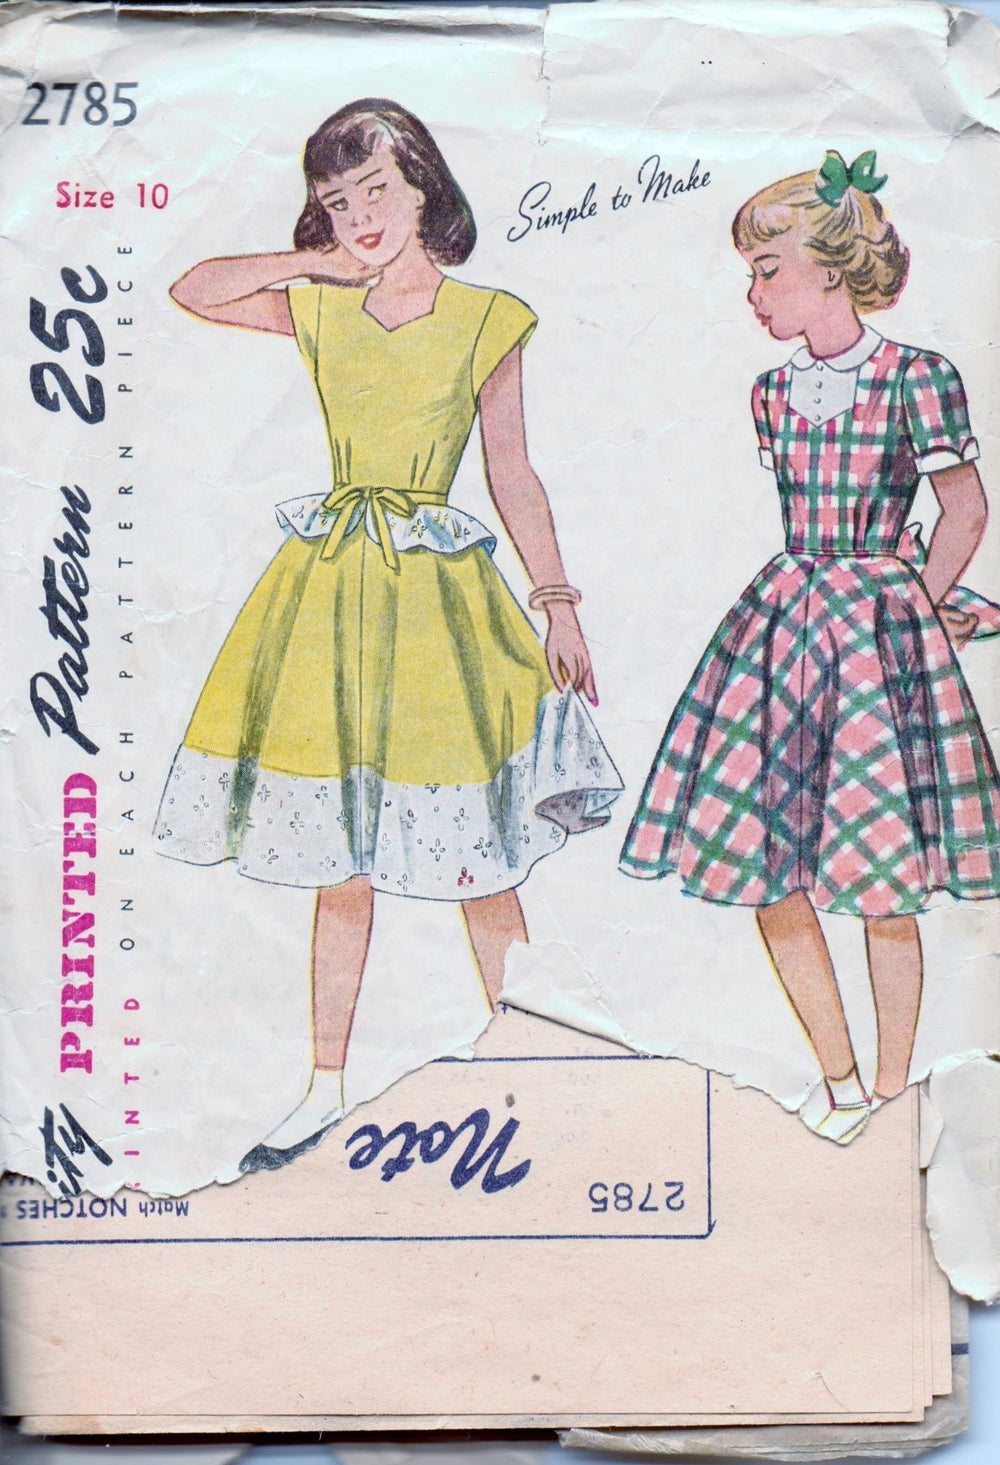 Simplicity 2785 Young Girls Party Dress Detachable Peplum Vintage 1940's Sewing Pattern - VintageStitching - Vintage Sewing Patterns